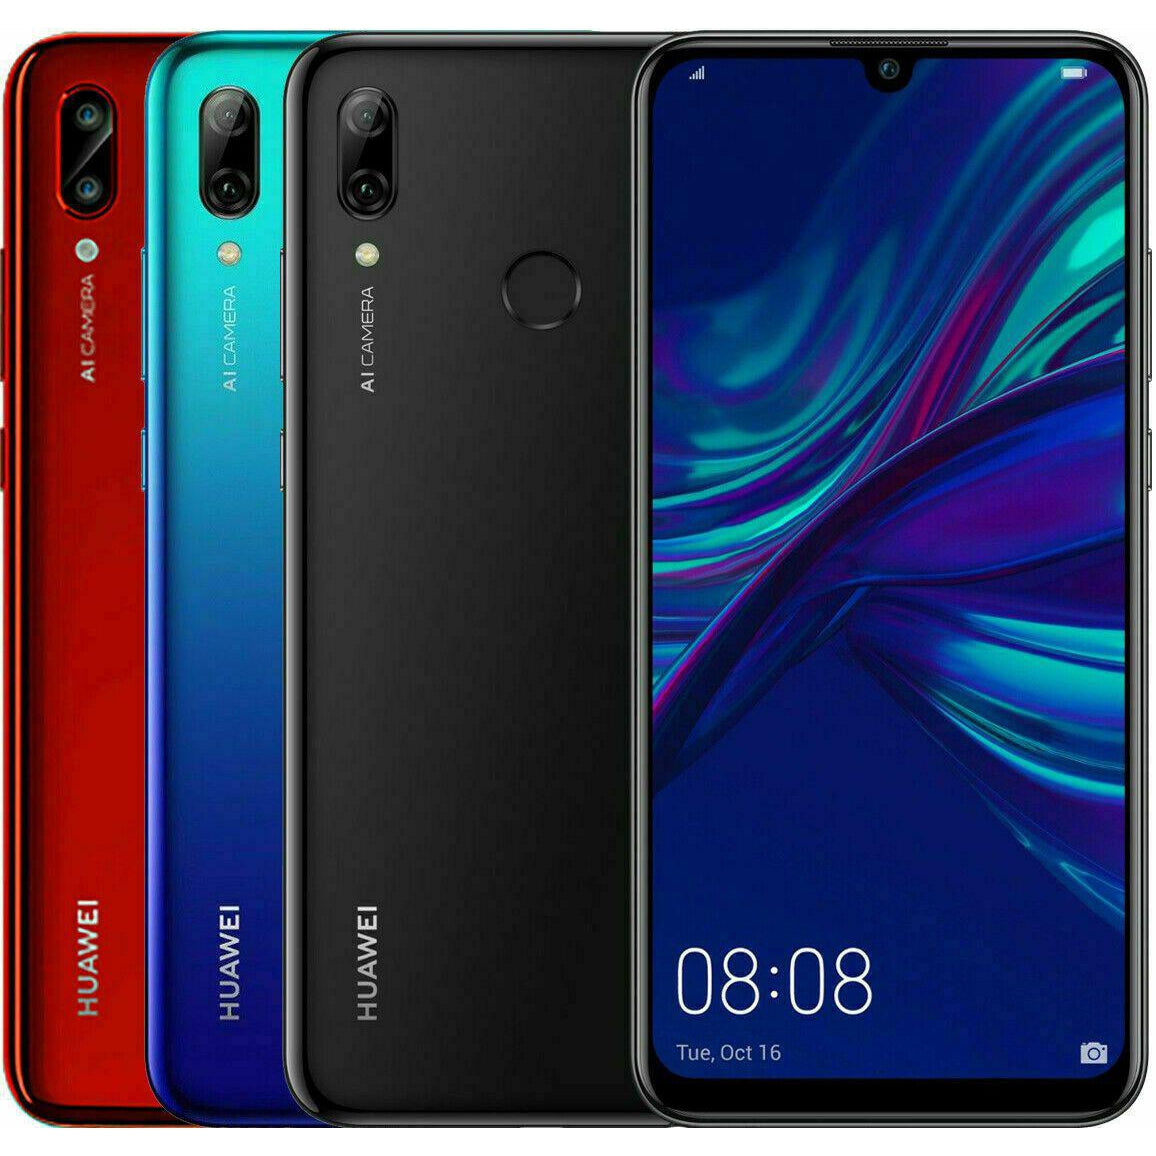 HUAWEI P Smart 2019 64GB 4G LTE Android Smartphone Dual Sim - Various Colours